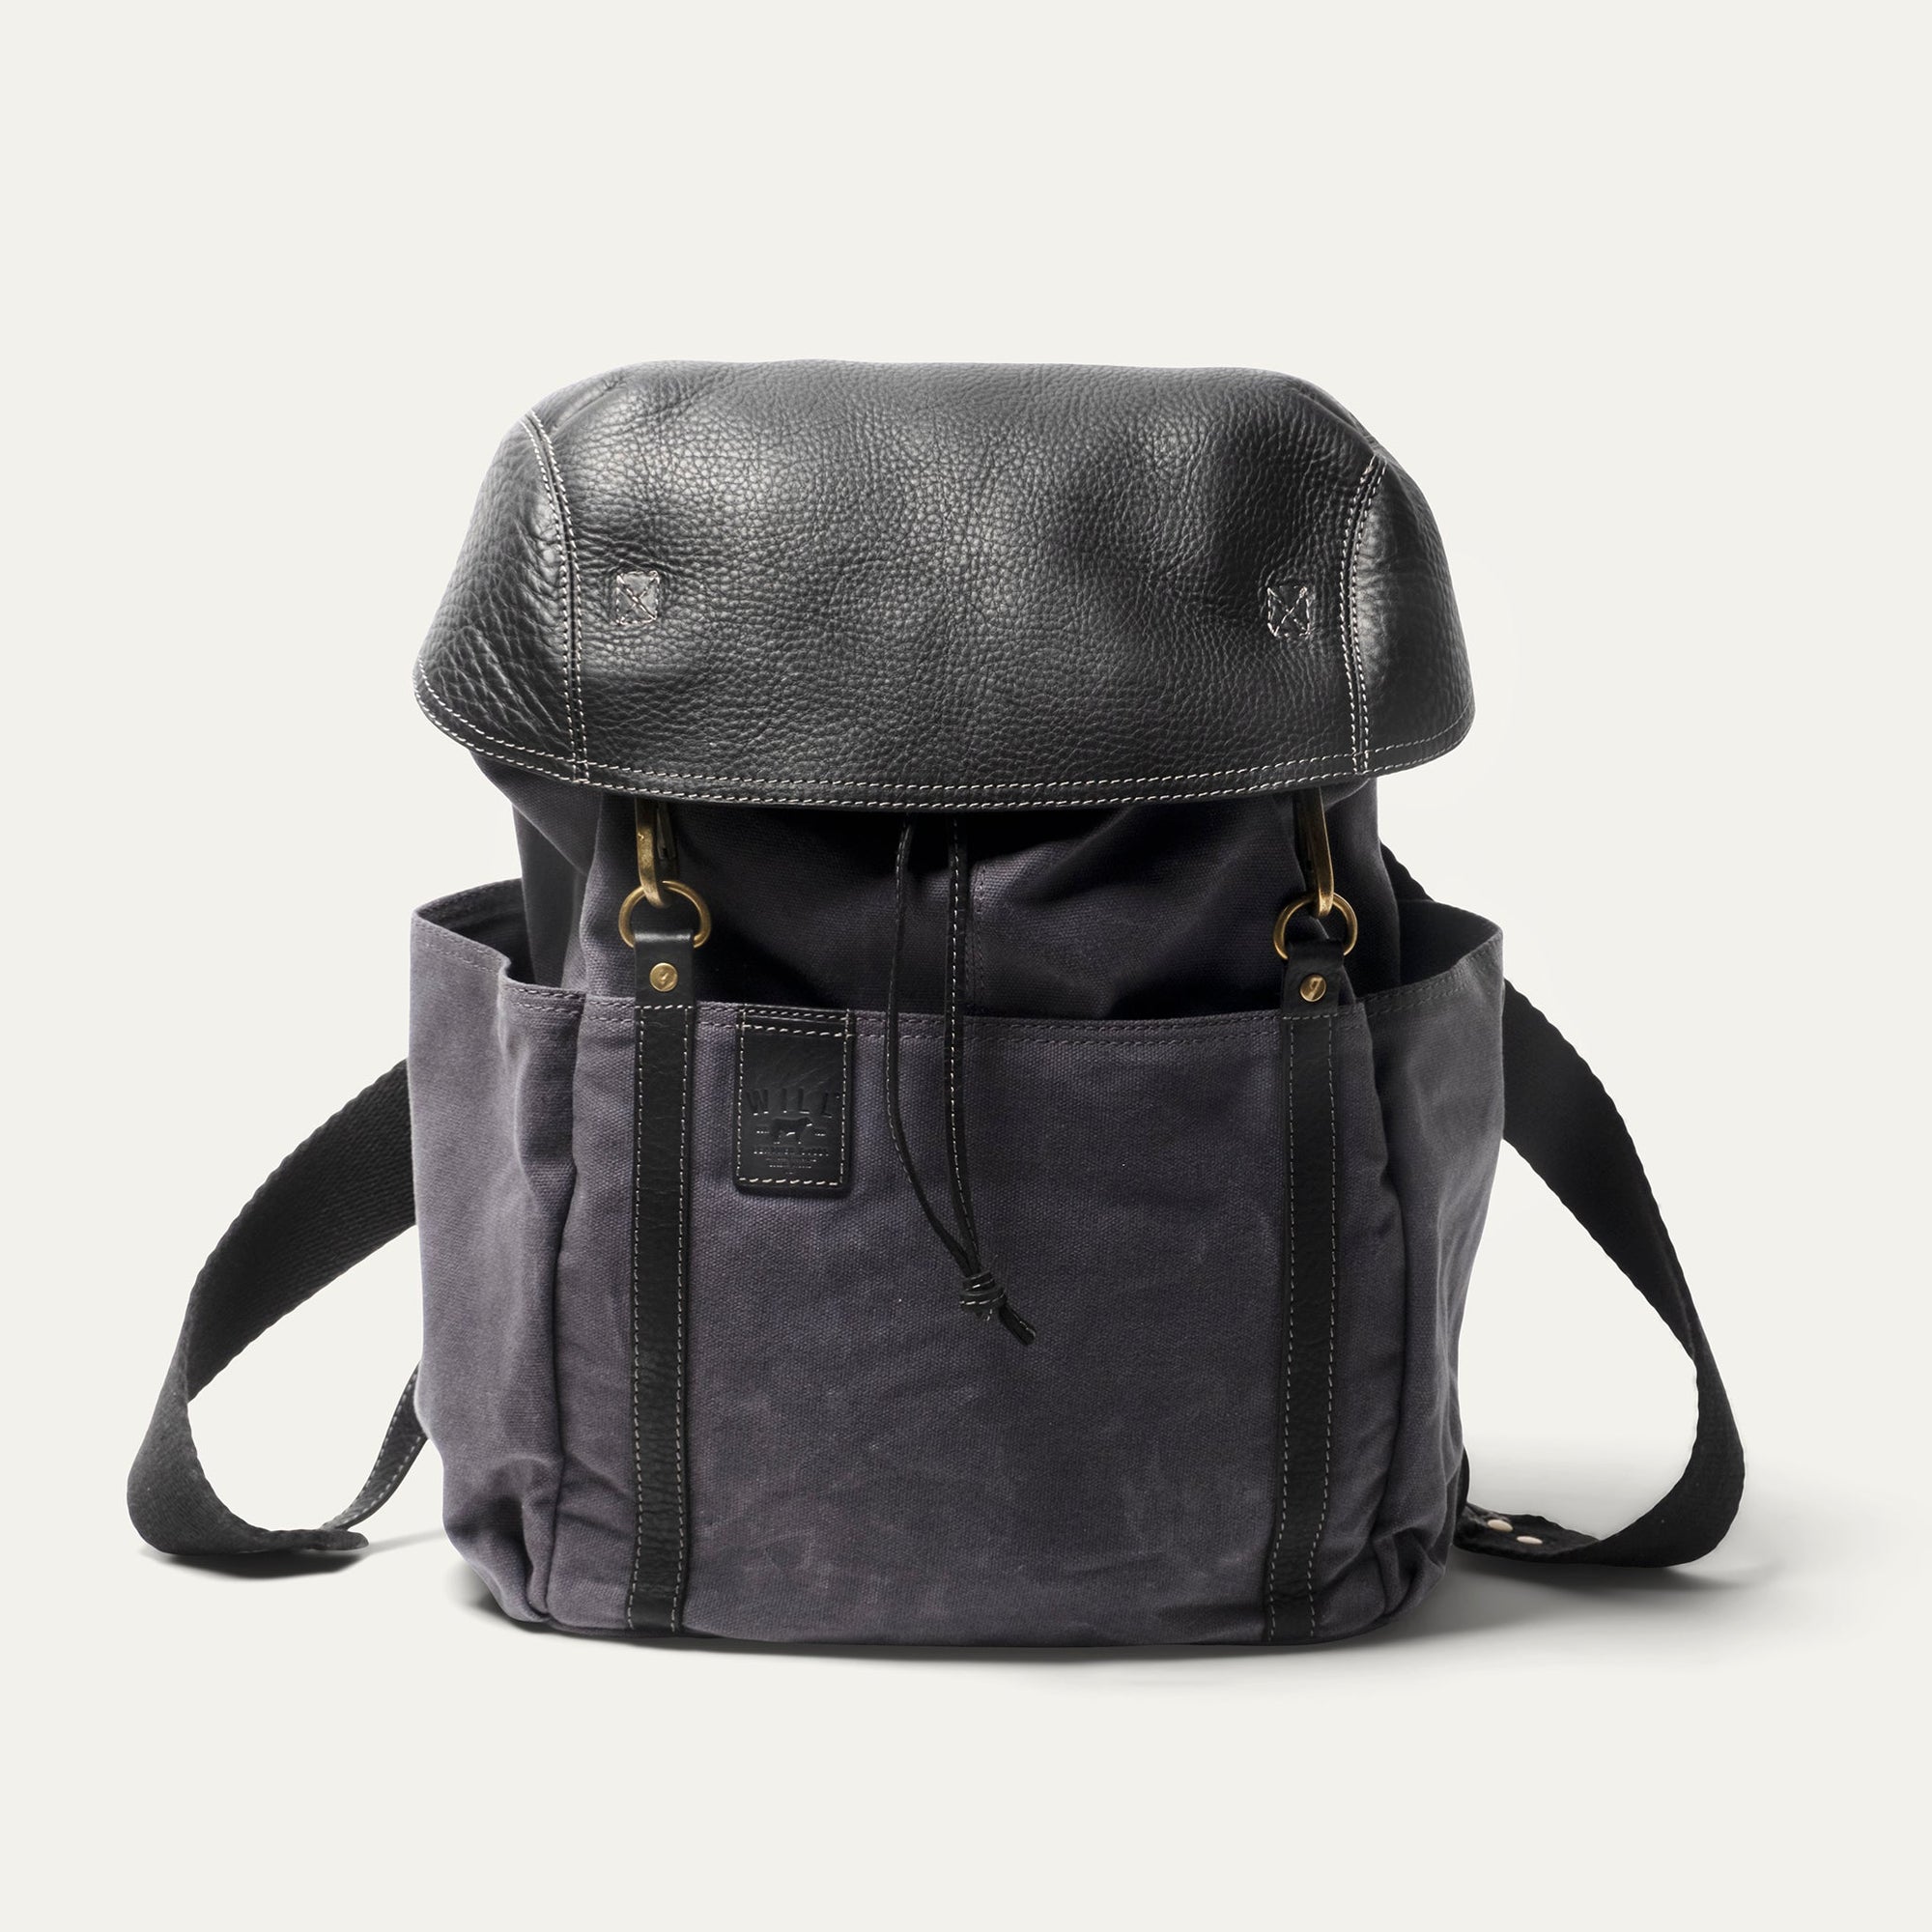 Waxed Canvas and Leather 'Adventure Collection' Explorer Backpack in Black/Charcoal by Will Leather Goods